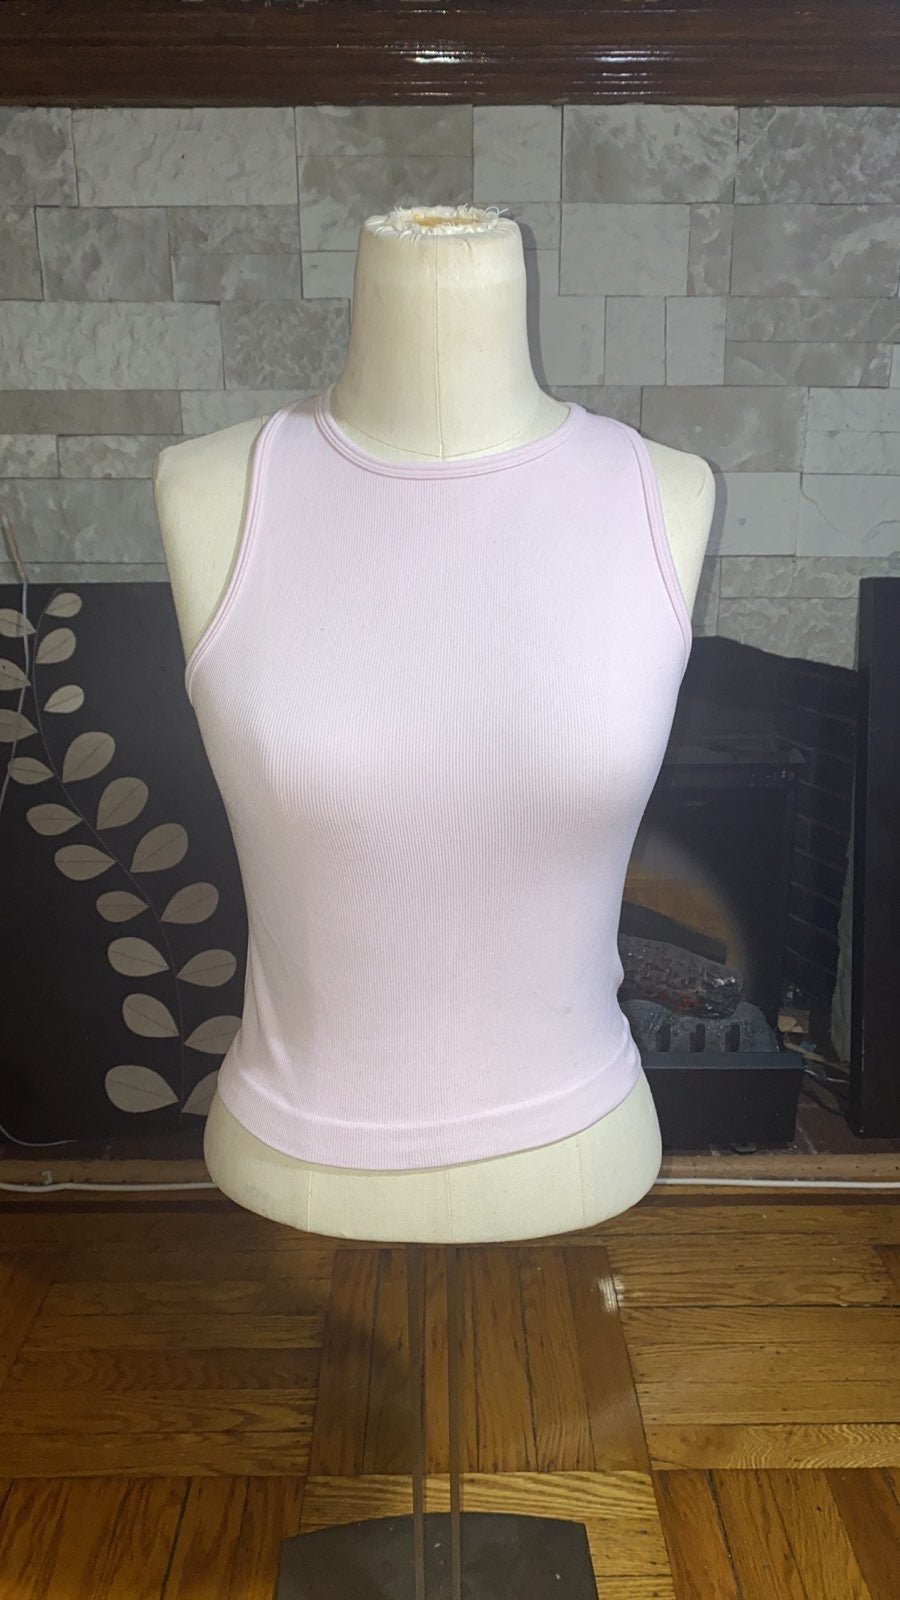 The Best Seller Free People Crop Tank Top Sz S Pink I3h